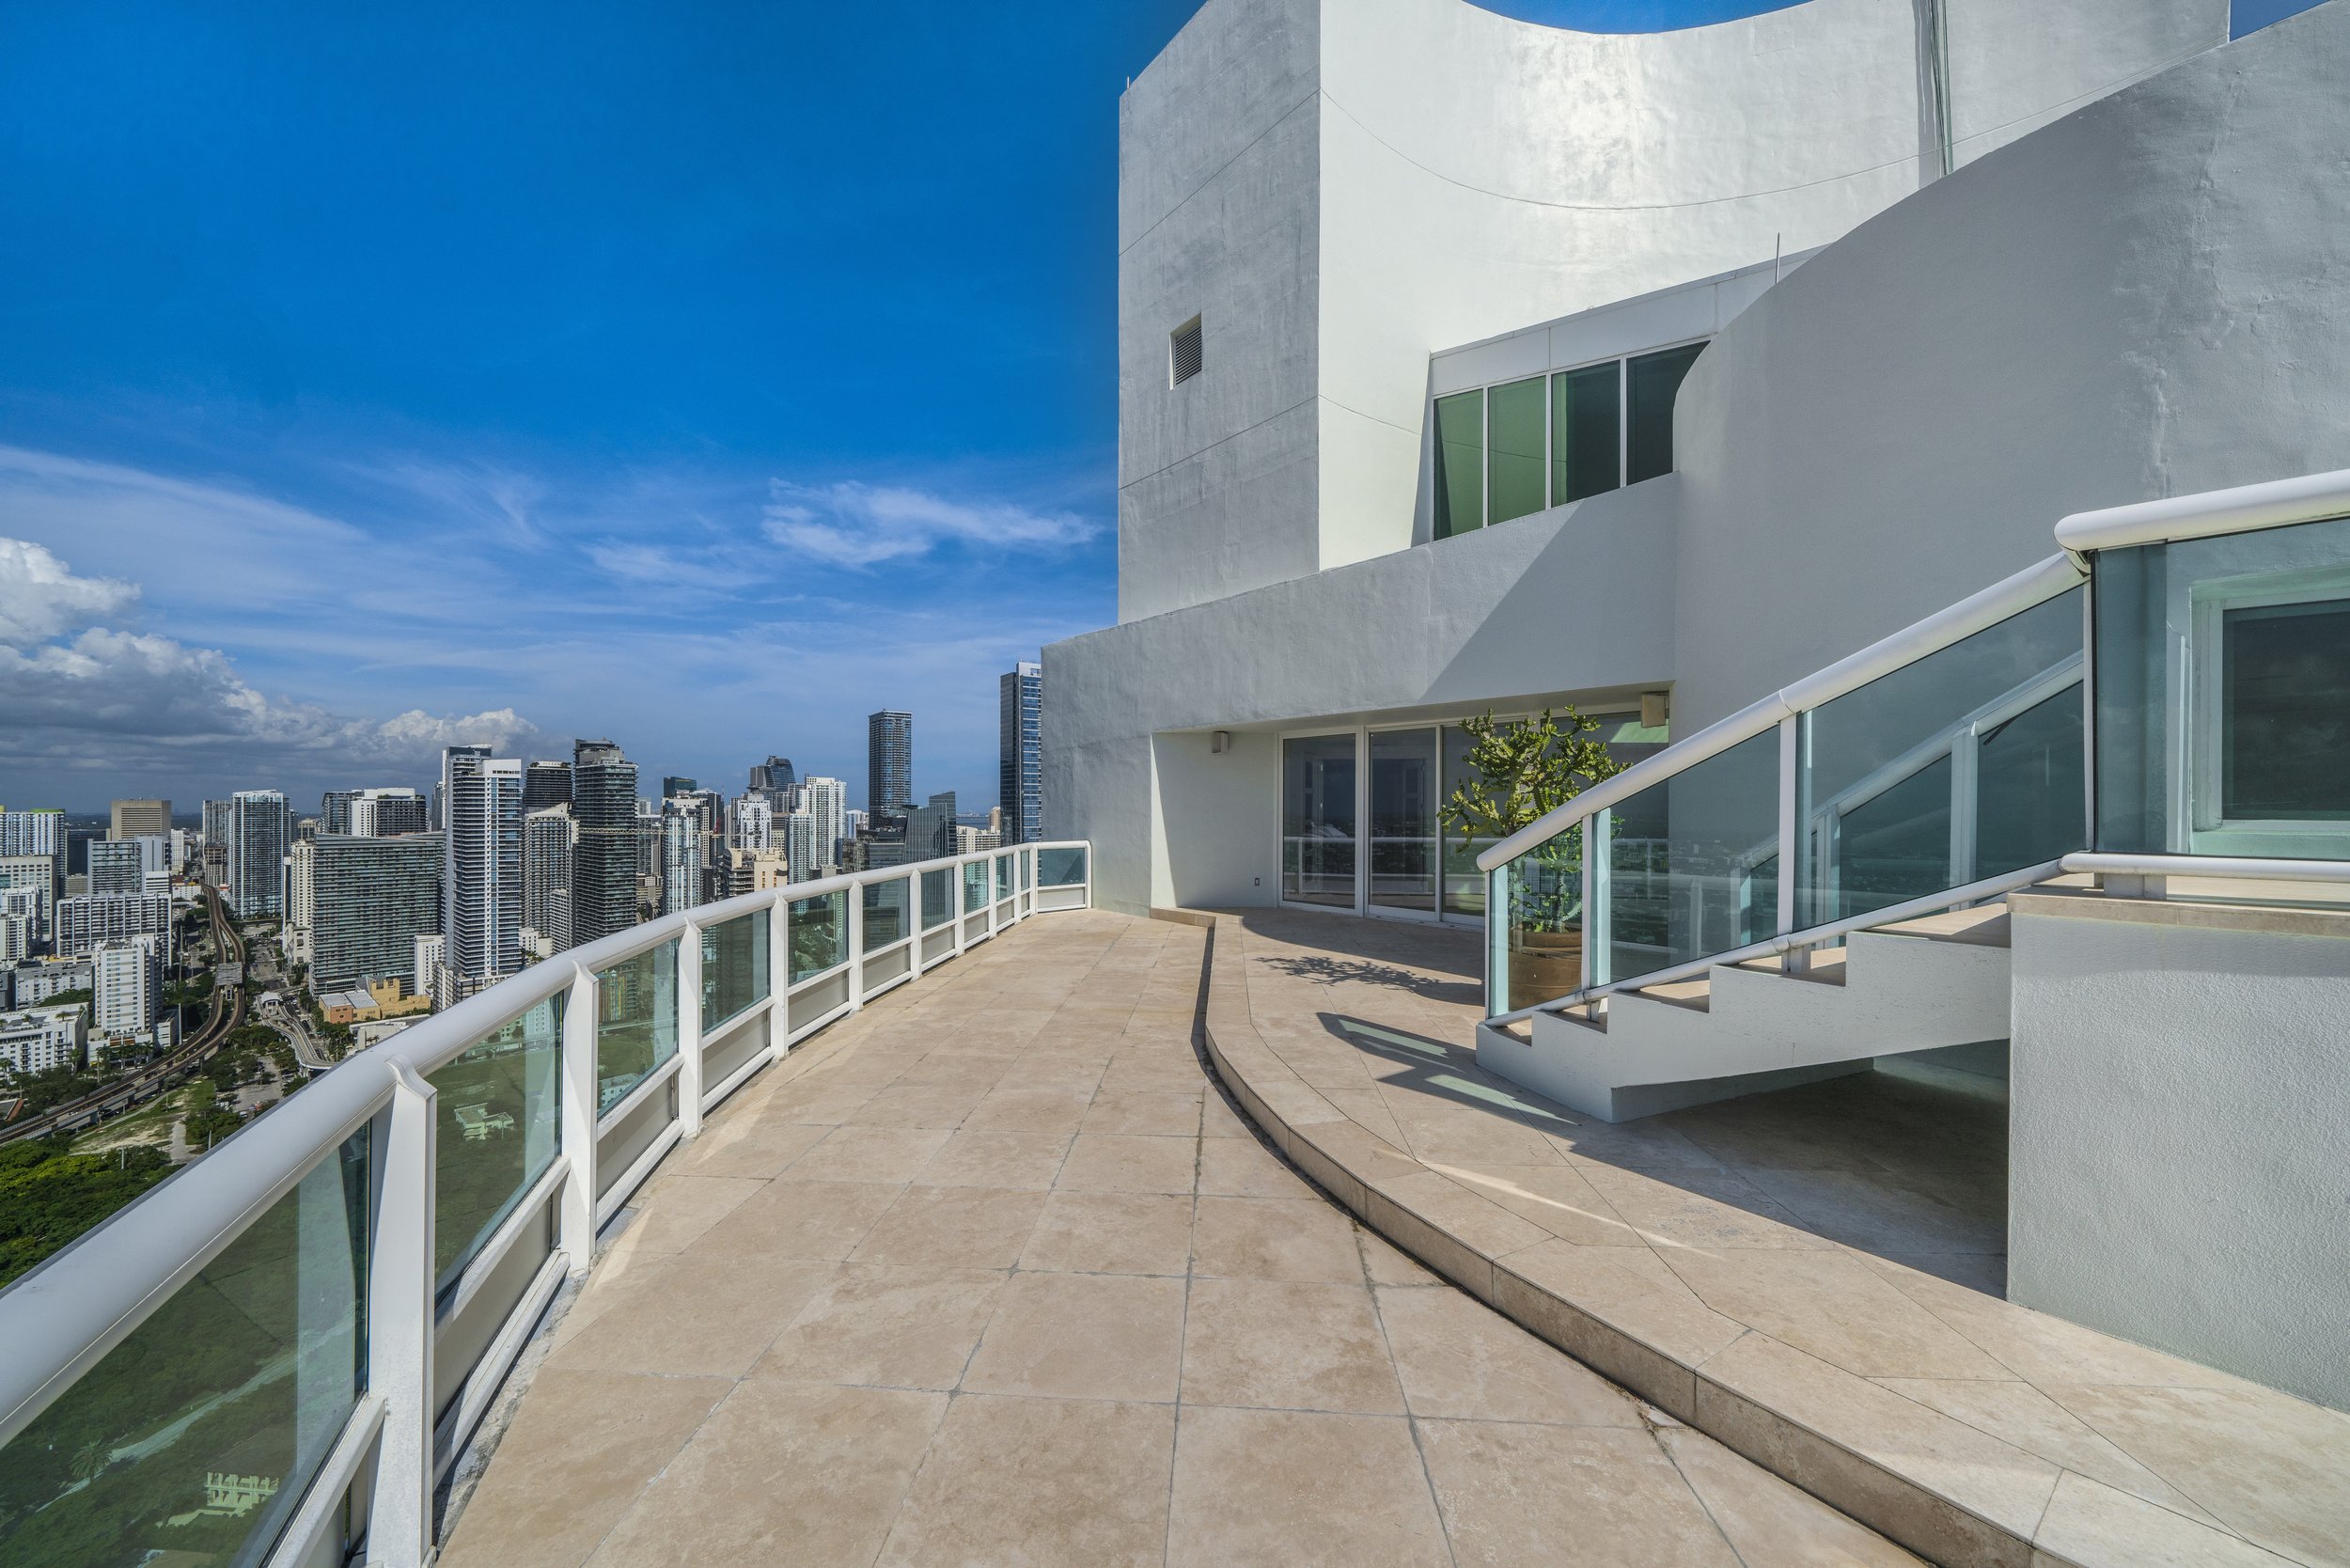 Beyonce, Elton John and Guns N' Roses Former Manager Lists Penthouse Atop Brickell's Exclusive Santa Maria Bayfront Condo Tower For $15 Million46.jpg